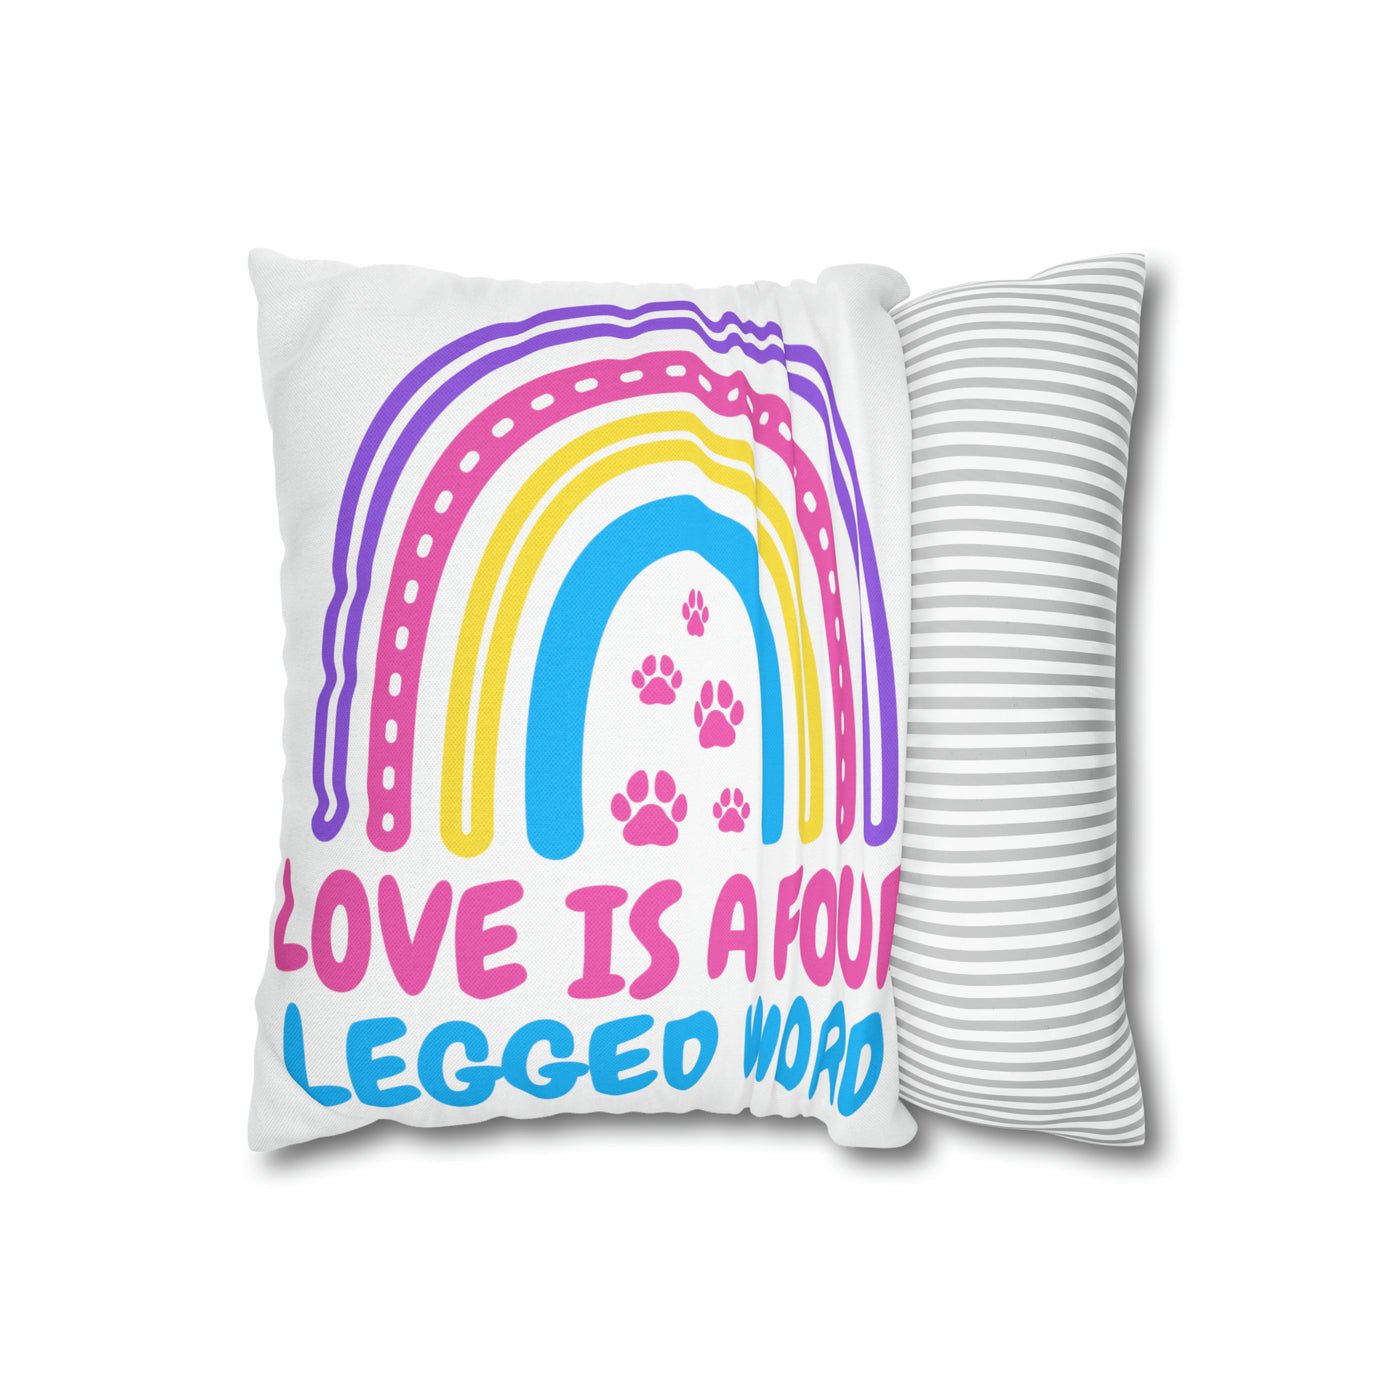 Love Is A Four Legged Word Pillow Cover